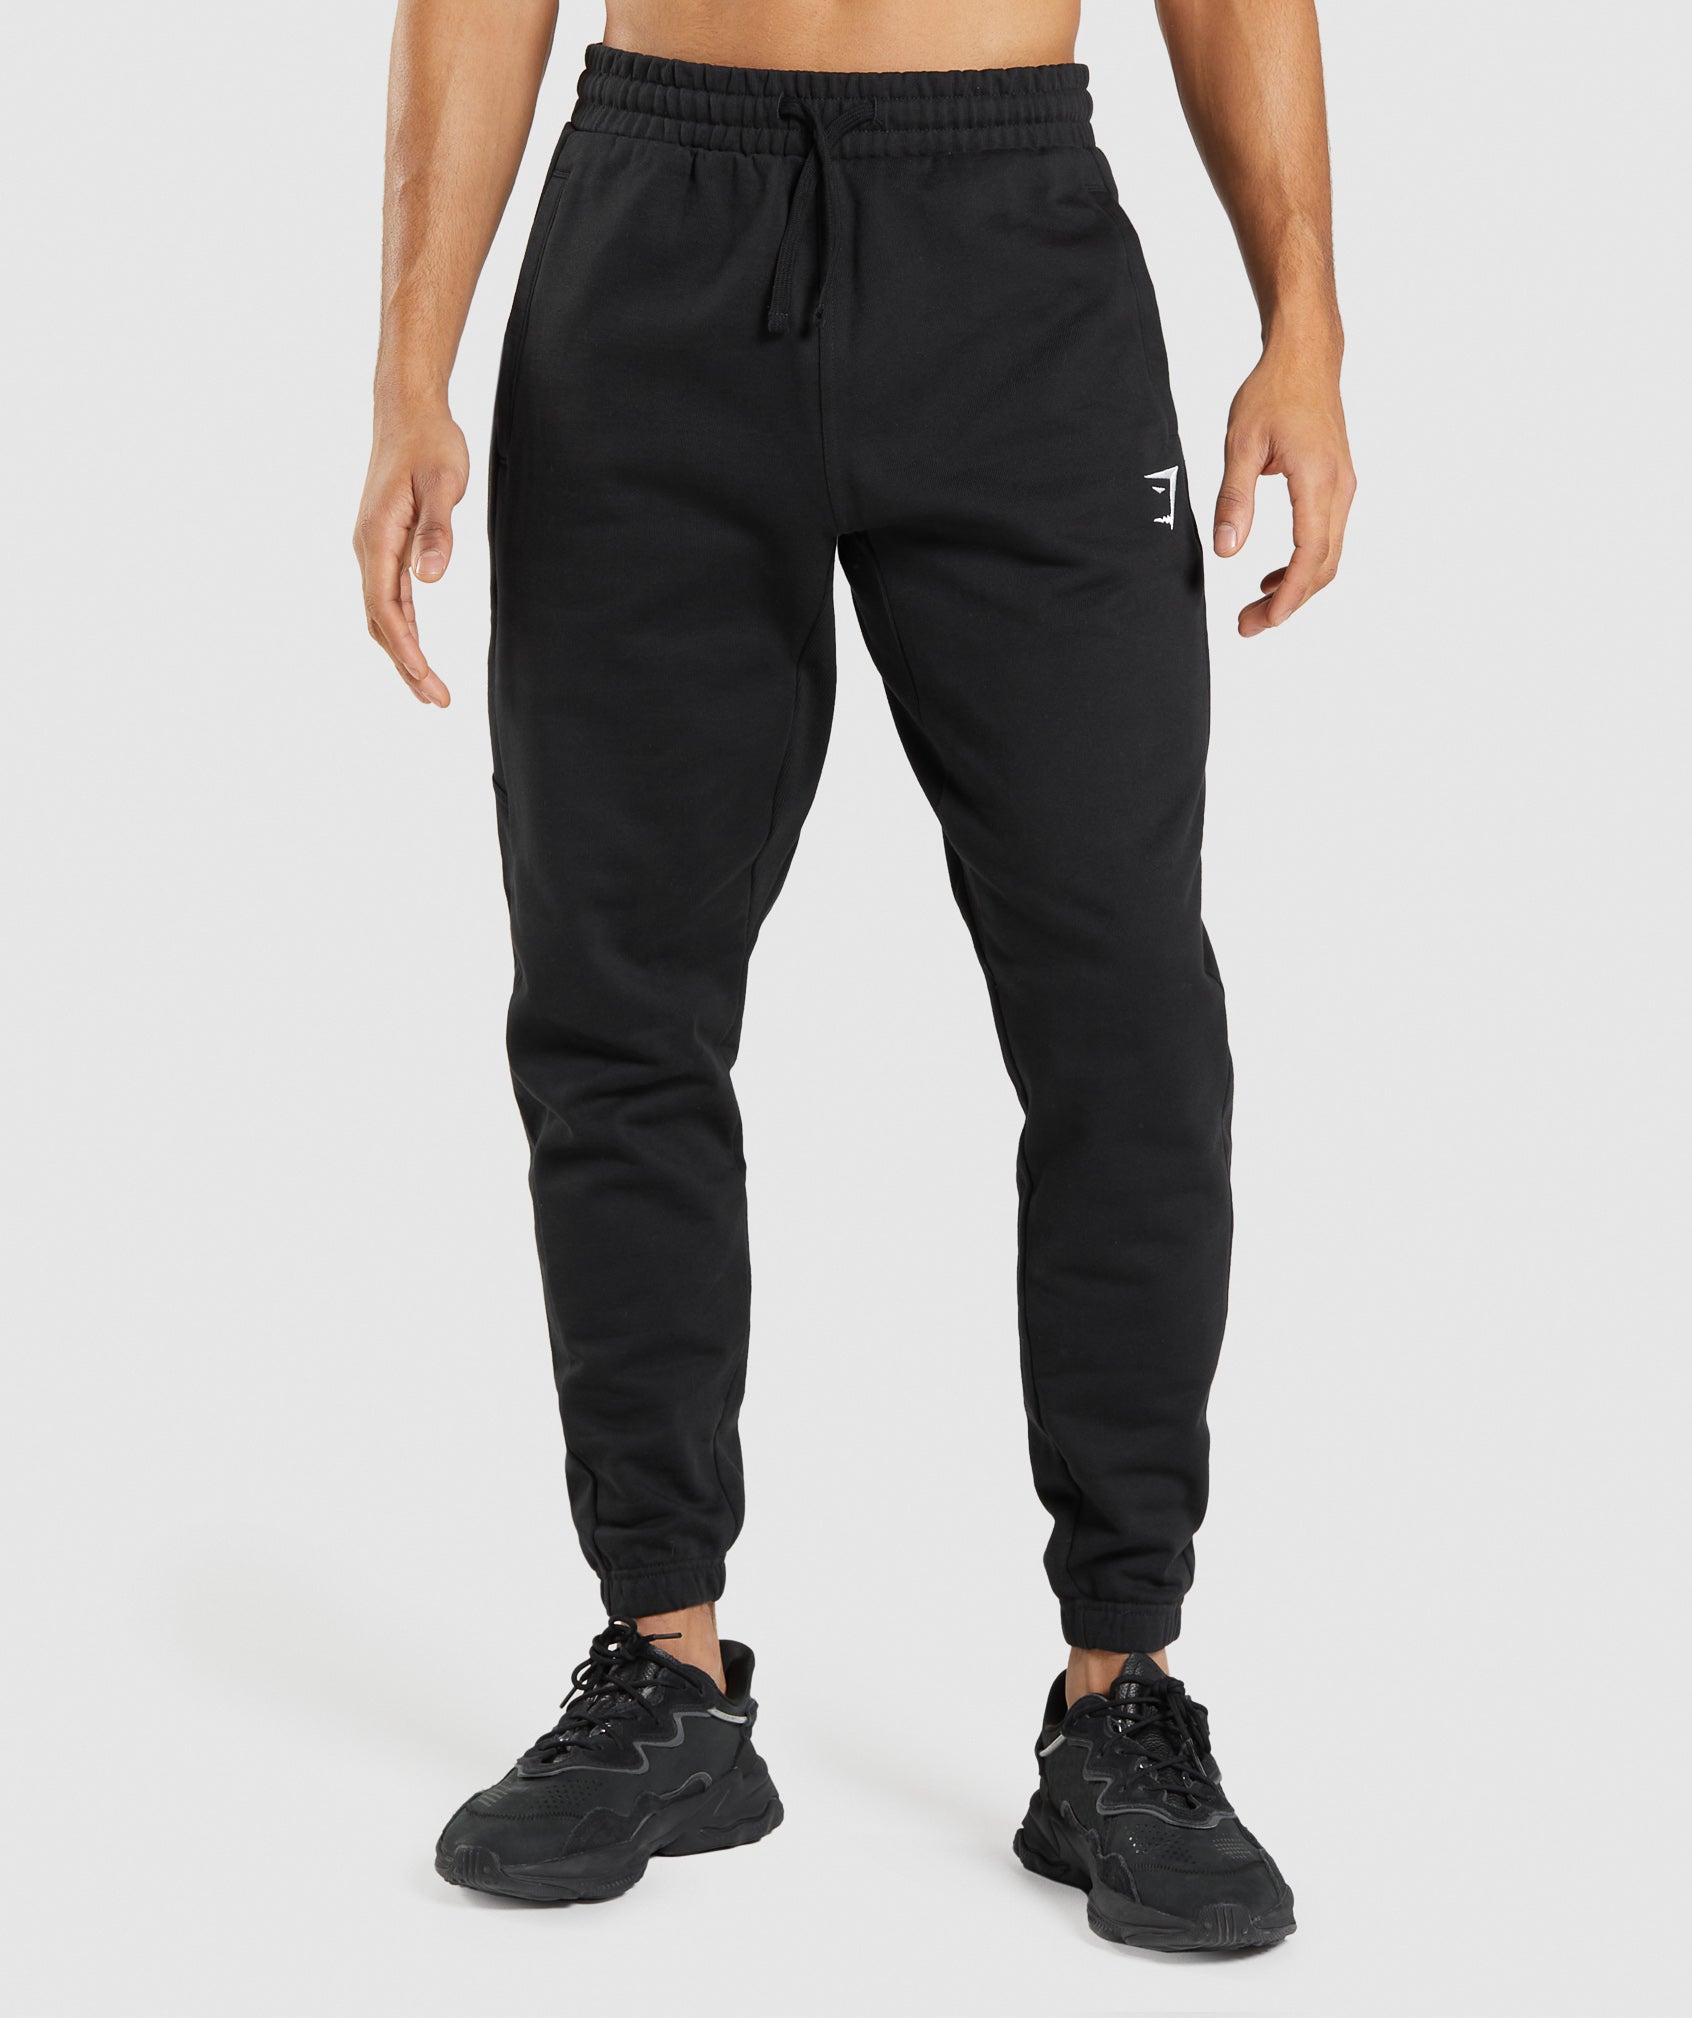 Gymshark Release Oversized Fit Jogger Pants – Sports Next Day